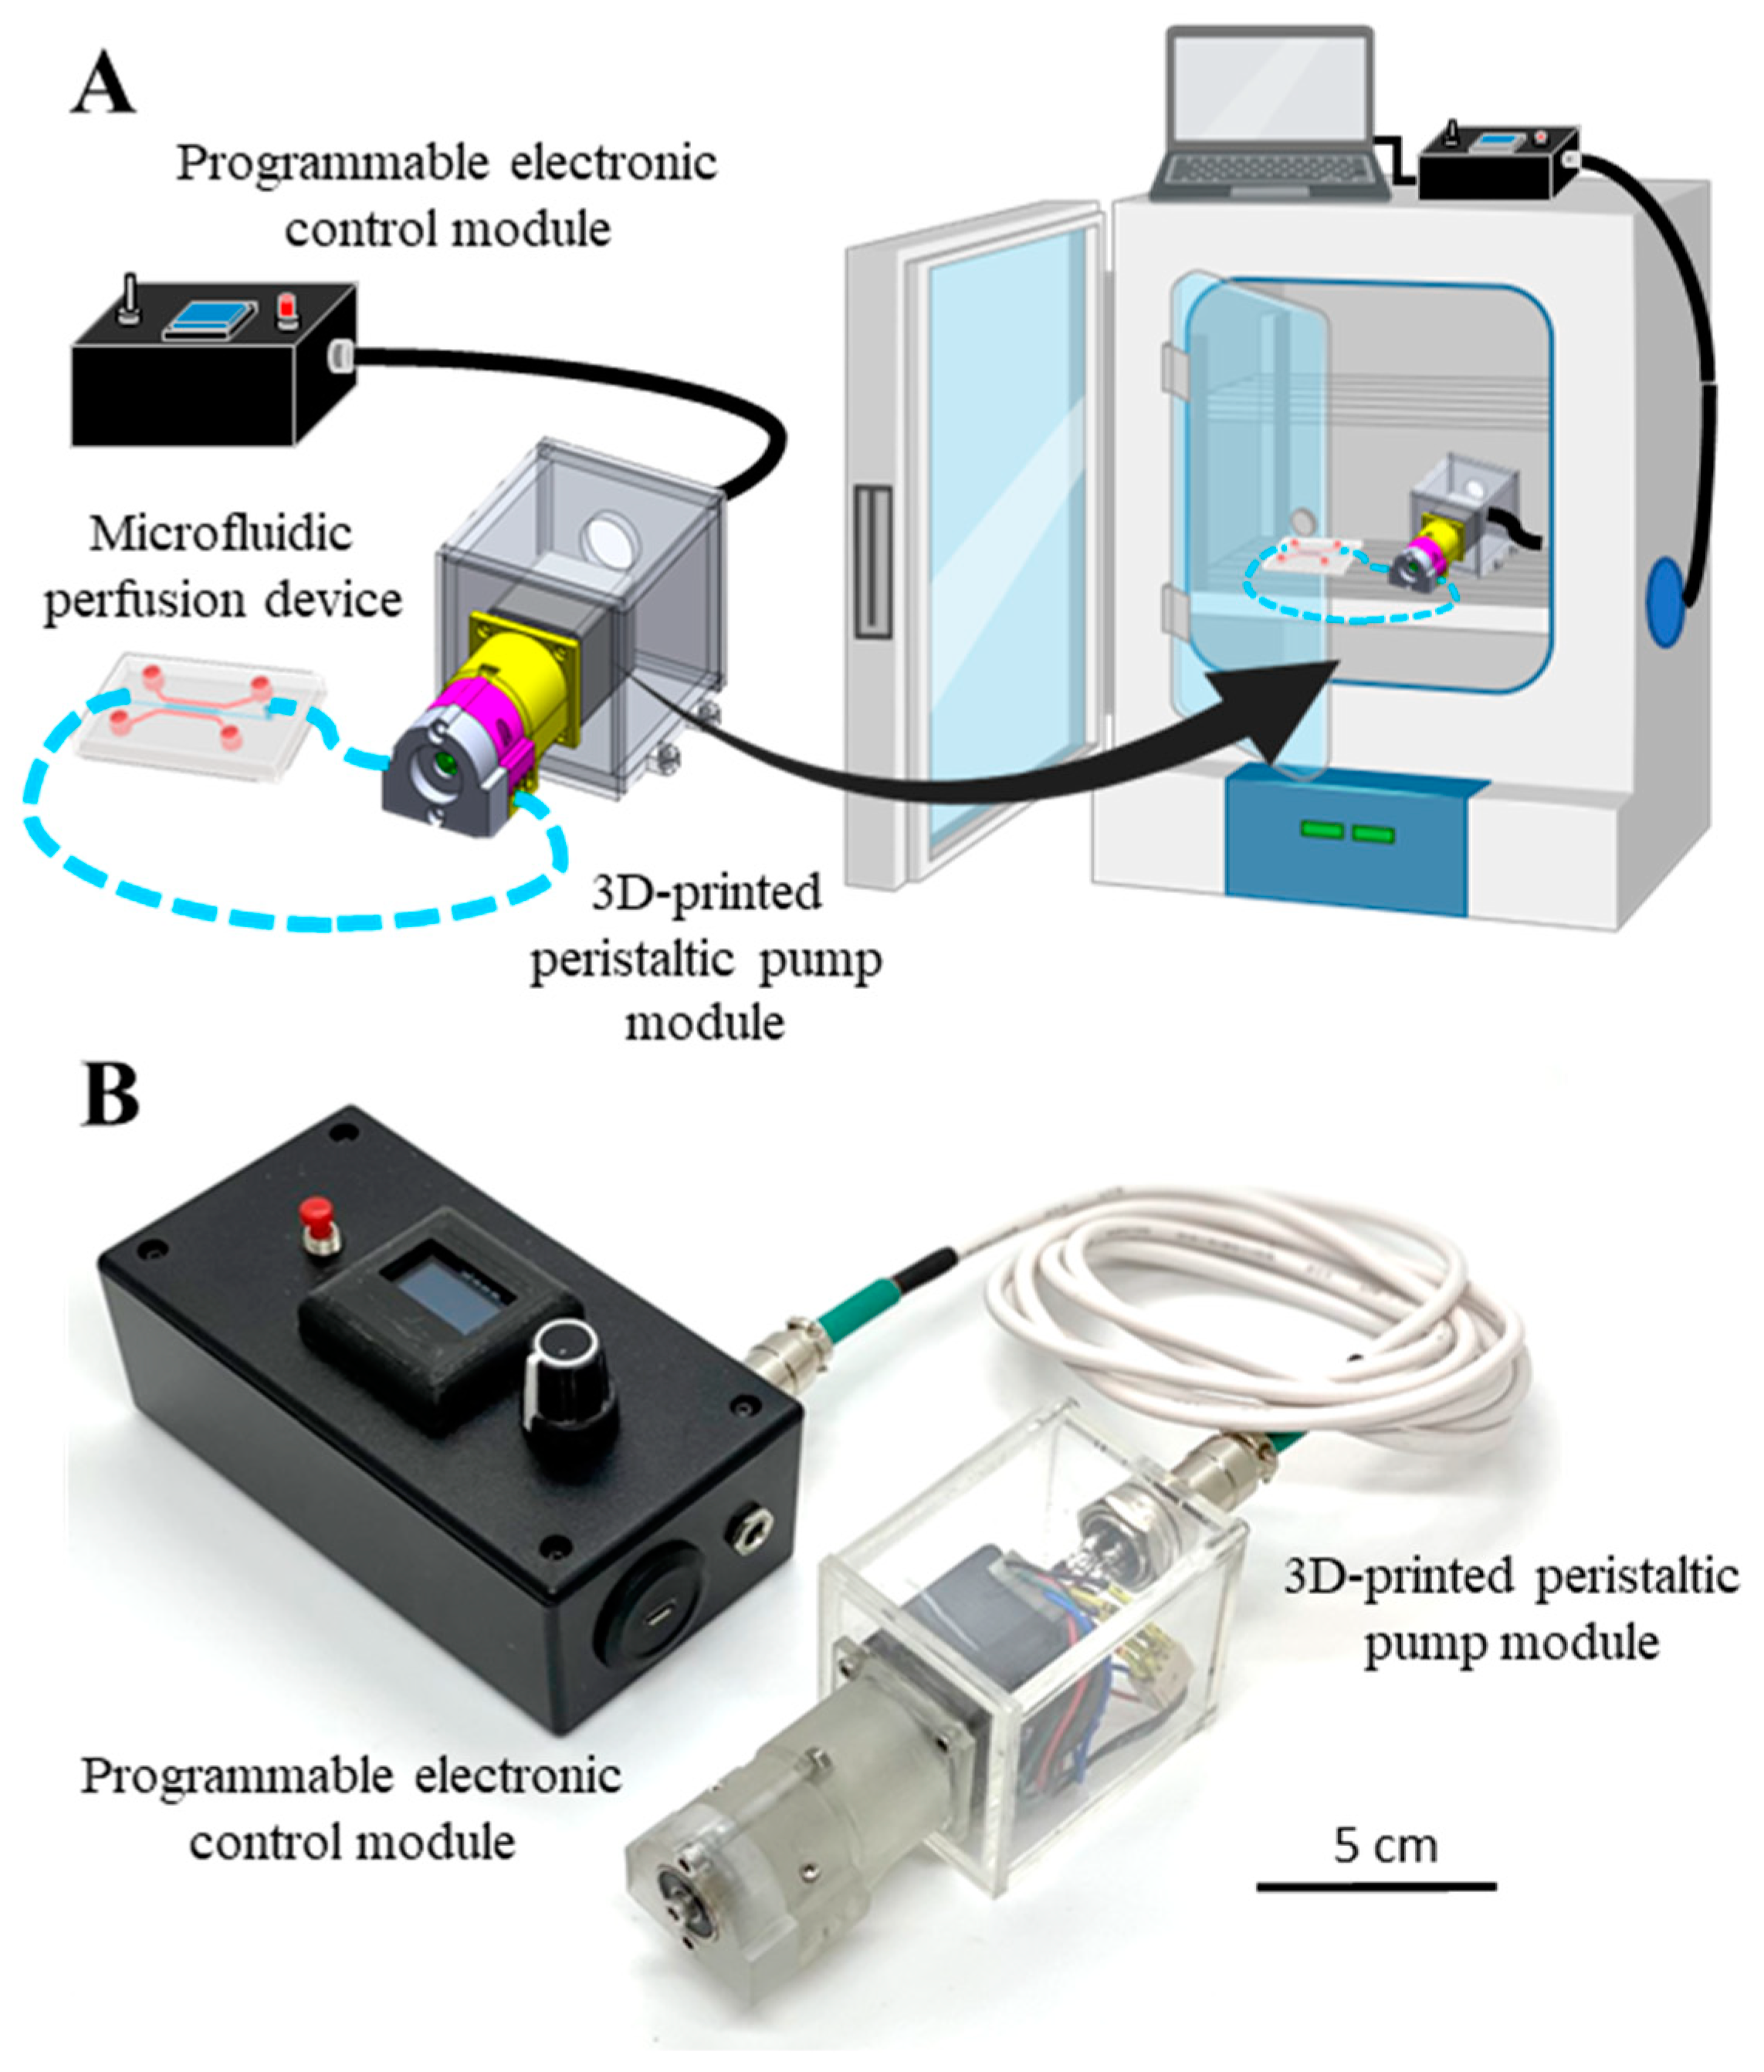 Micromachines | Free Full-Text A User-Centric 3D-Printed Modular Peristaltic Pump for Microfluidic Perfusion Applications